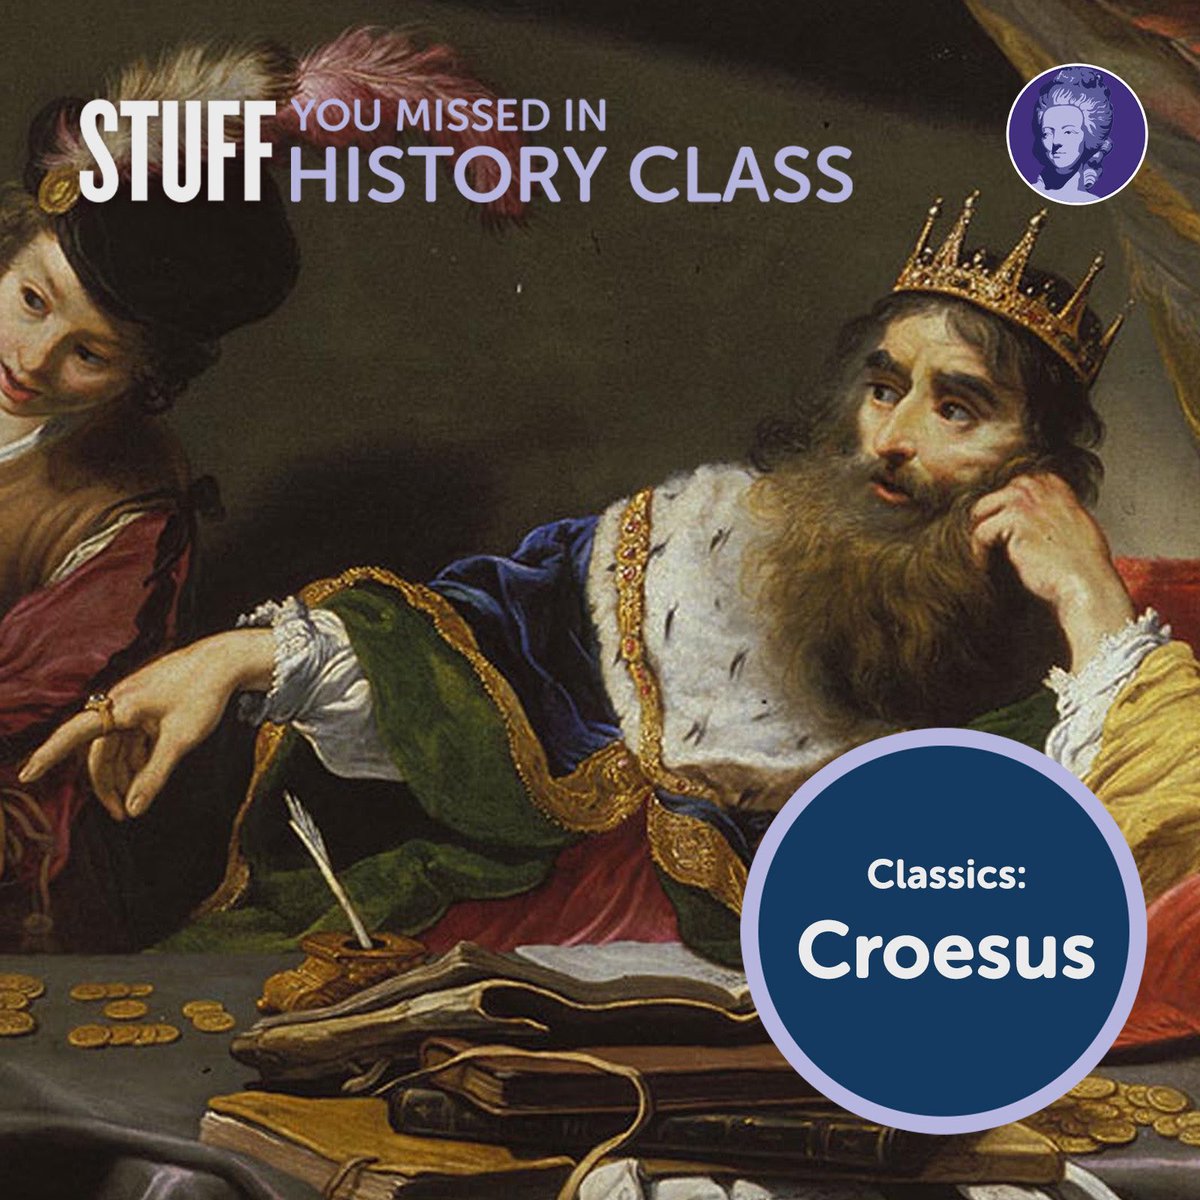 This 2020 episode shares the story of the ridiculously wealthy Croesus, which was likely fictionalized in a number of ways. It has become sort of a cautionary tale about pride and hubris, and what really has value in life.

Listen here: omny.fm/shows/stuff-yo…